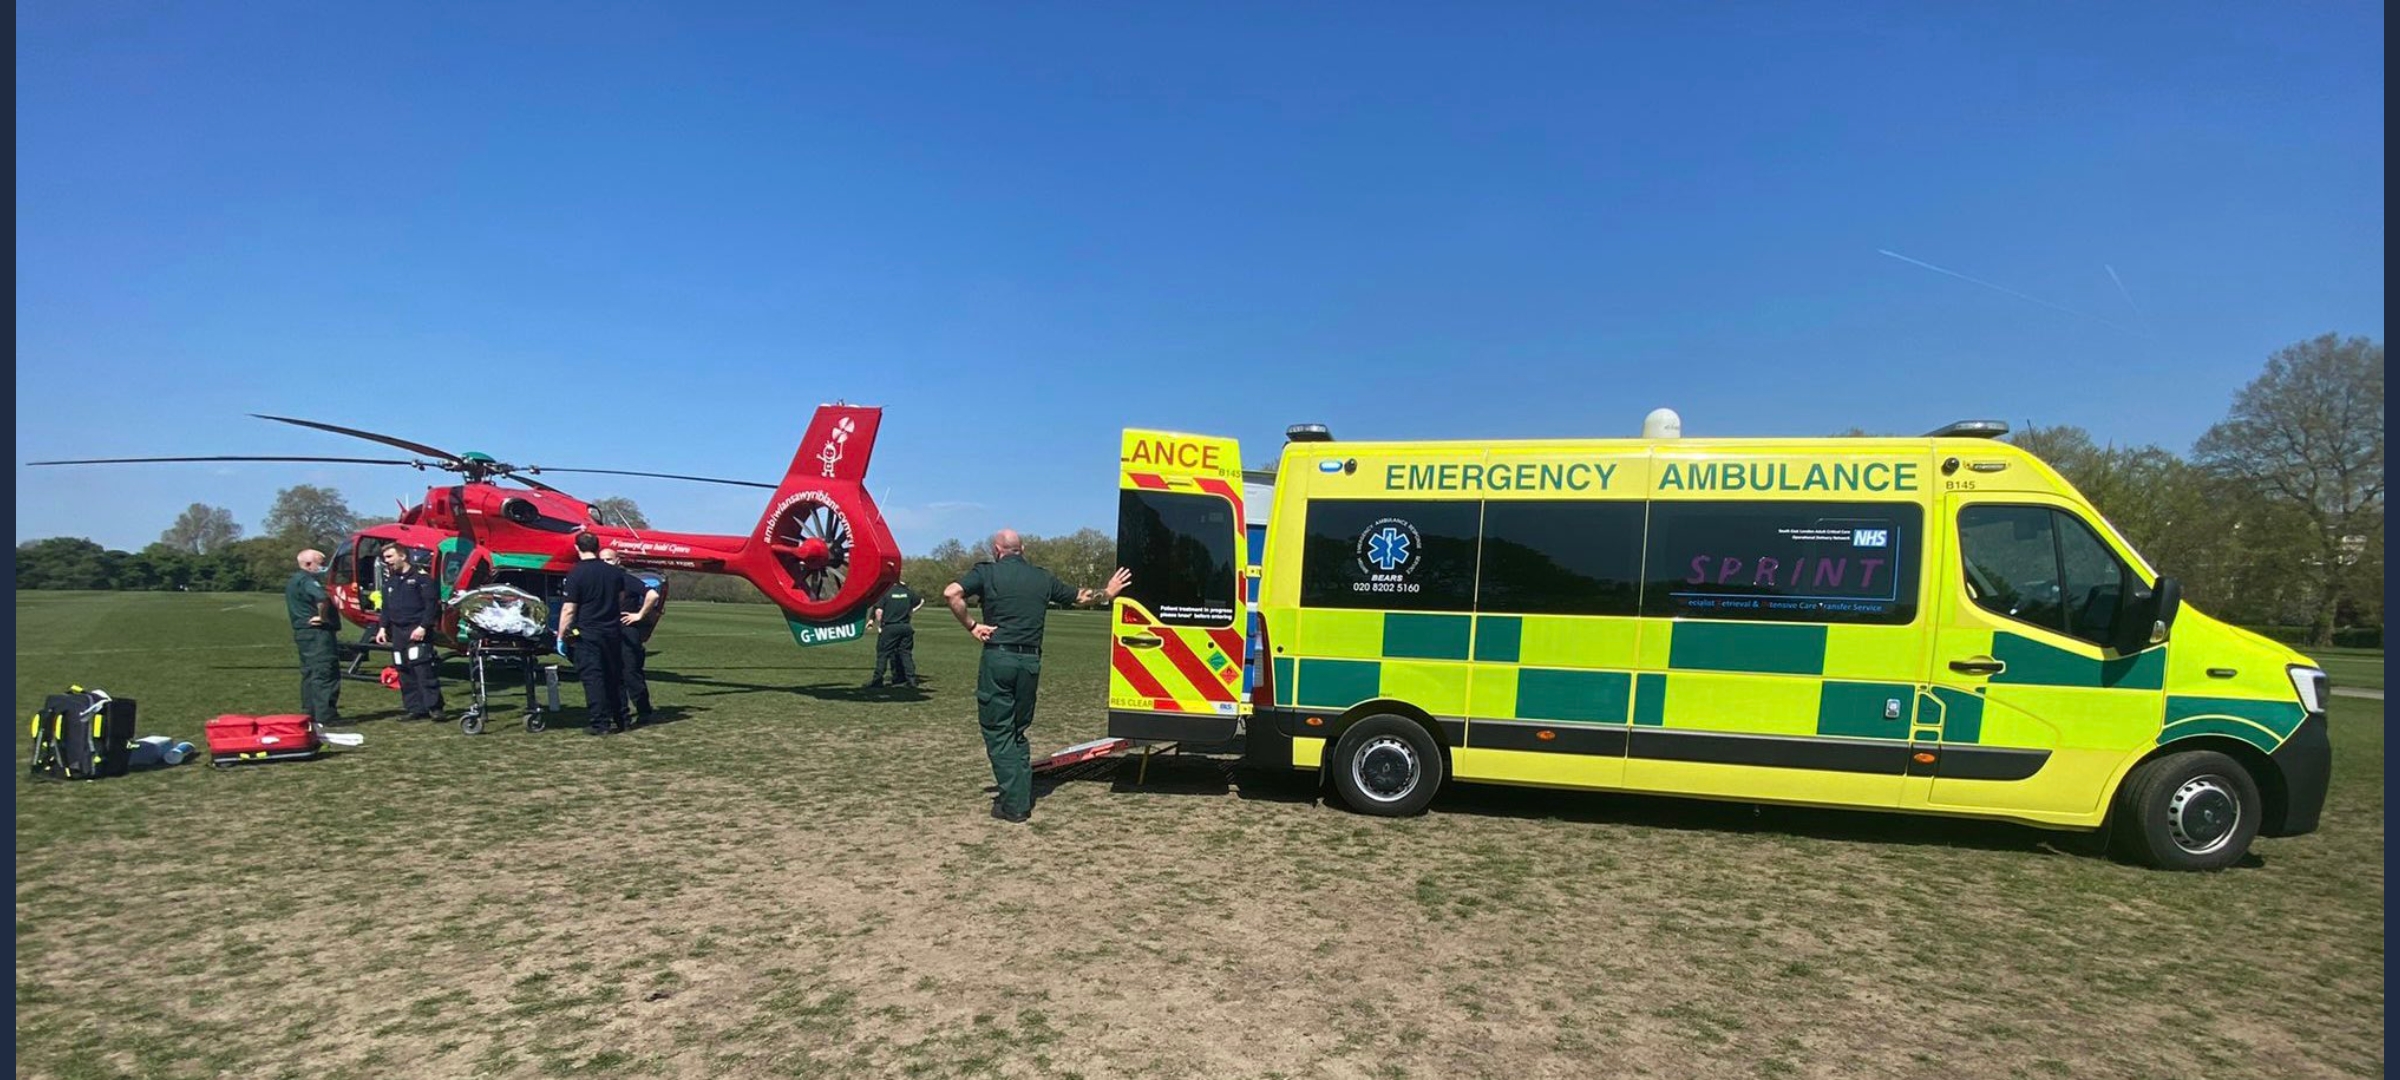 Image shows RAF medics with an air ambulance helicopter and van.